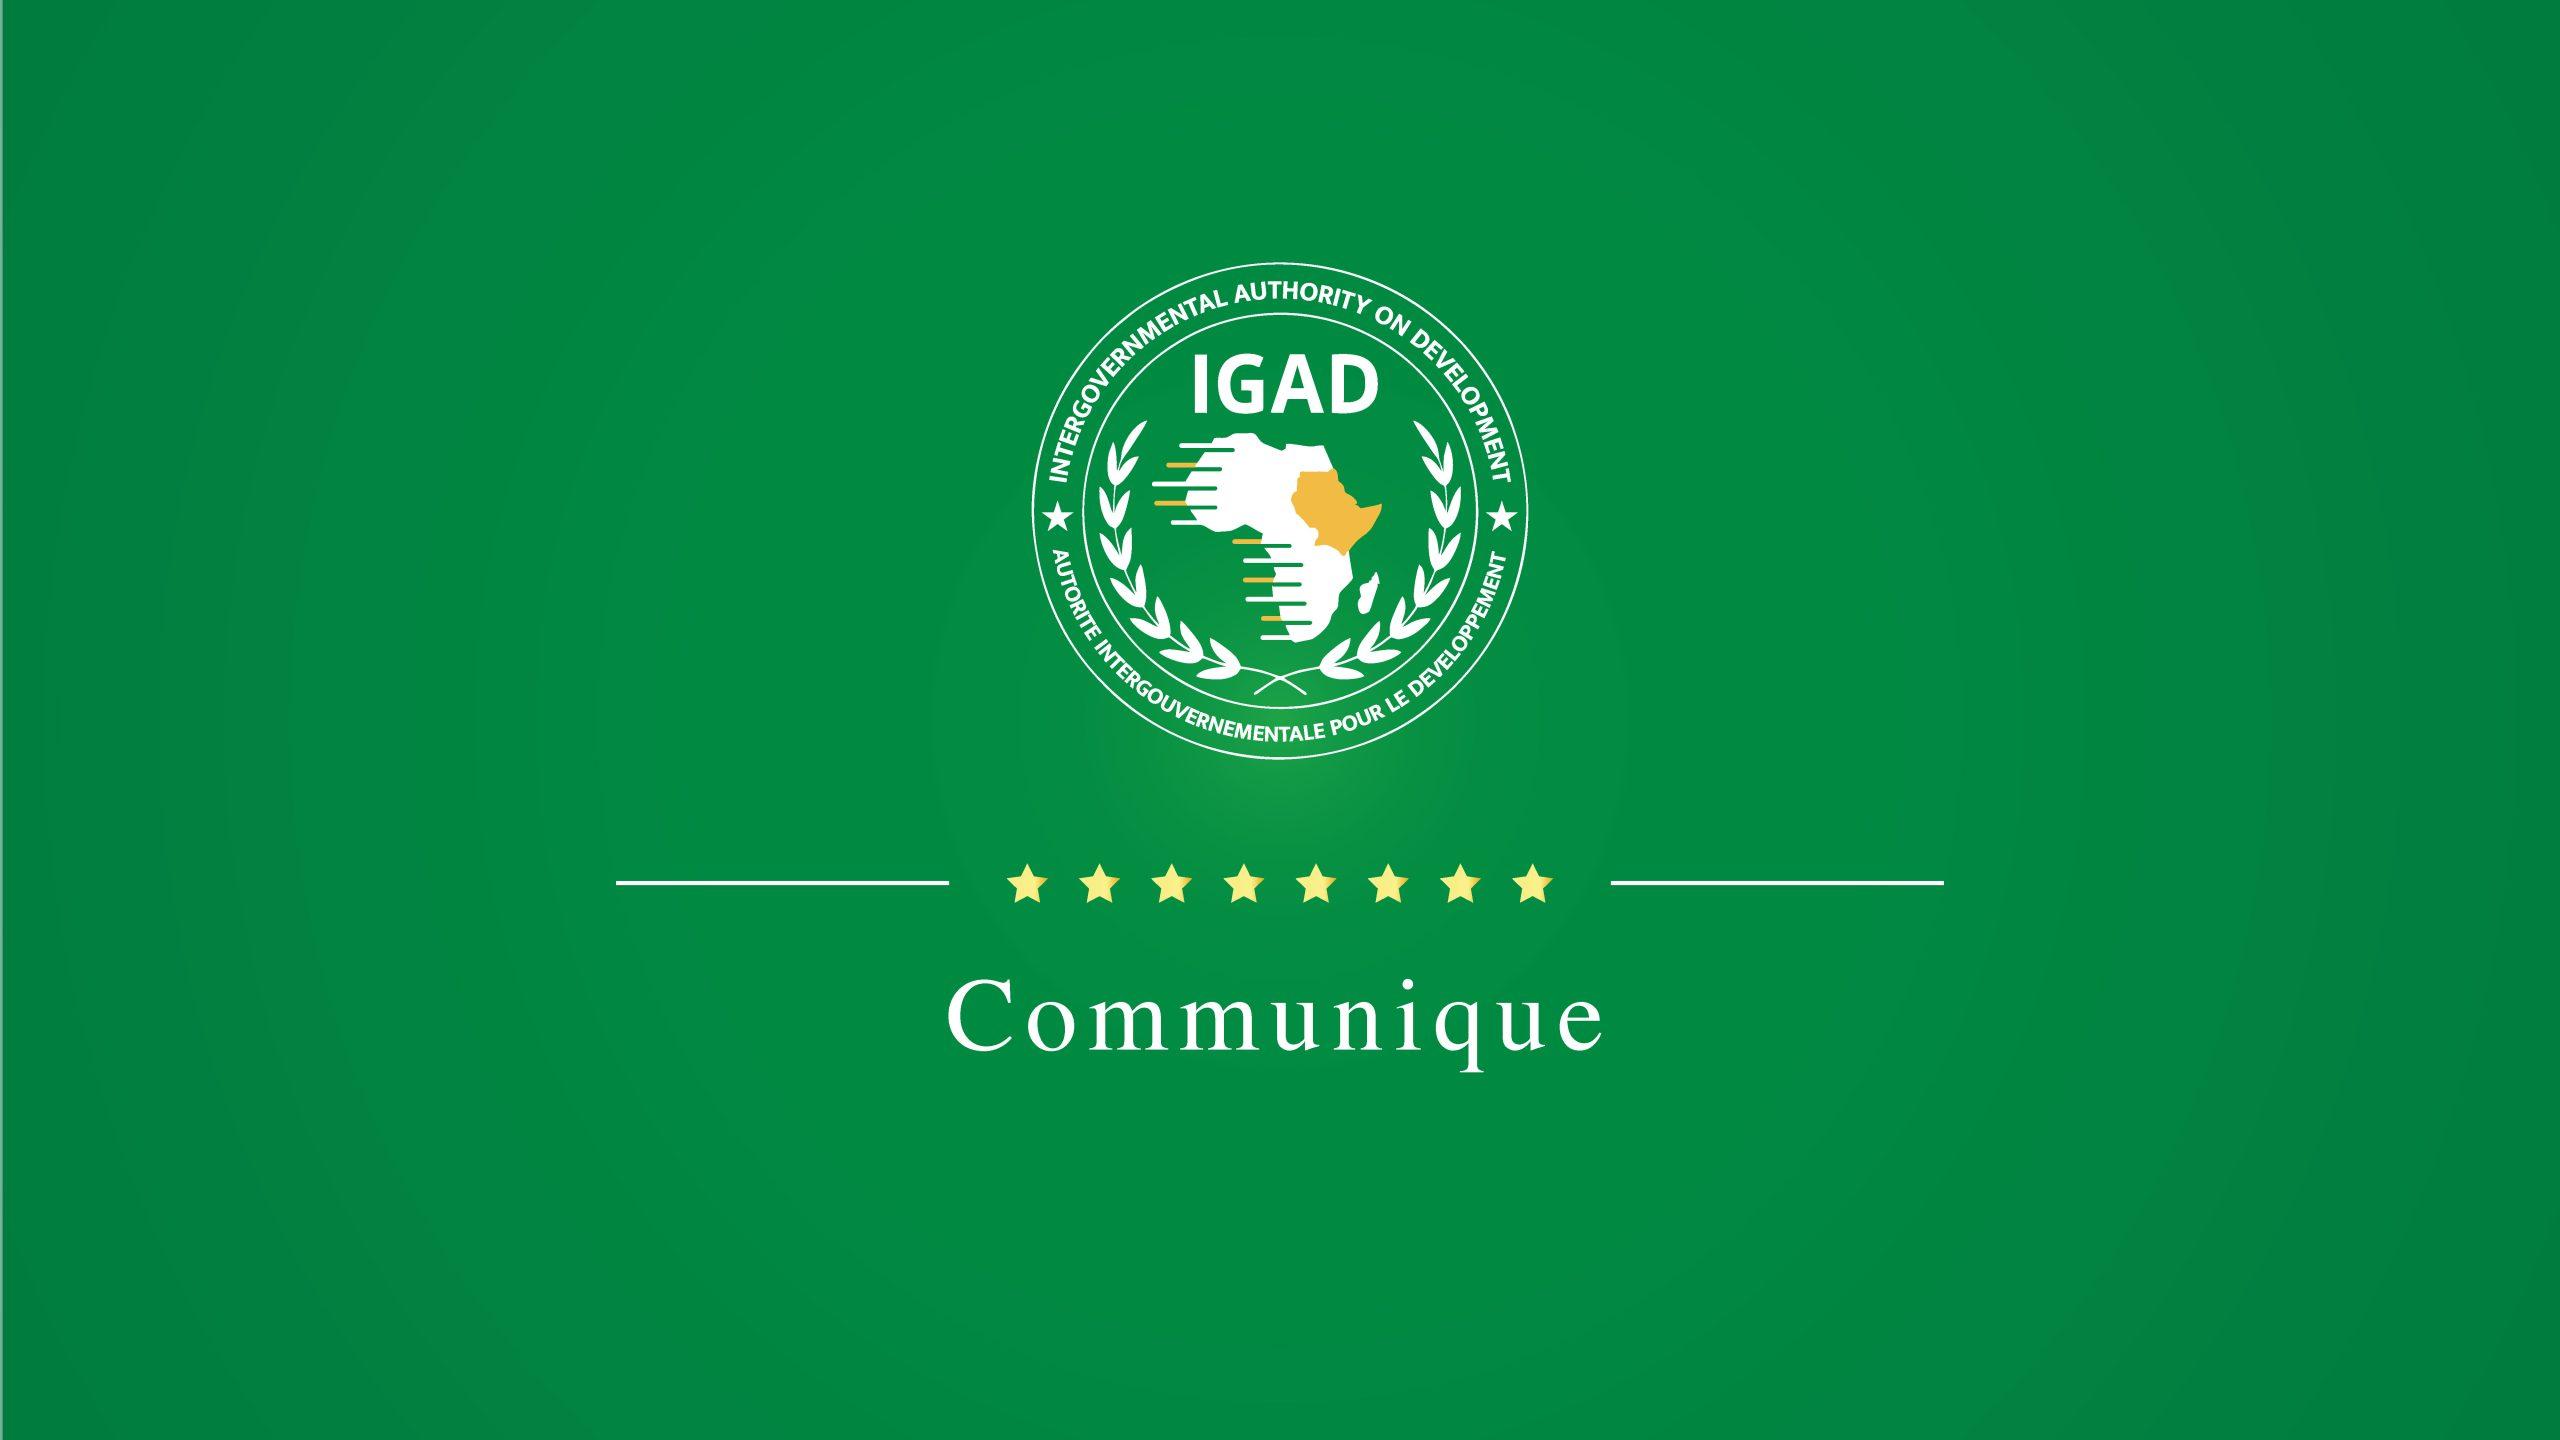 Communique during the IGAD Regional Ministerial Meeting on the Process of Strengthening, Adapting, and Accelerating National and Regional Efforts to Address Food Crises in East Africa